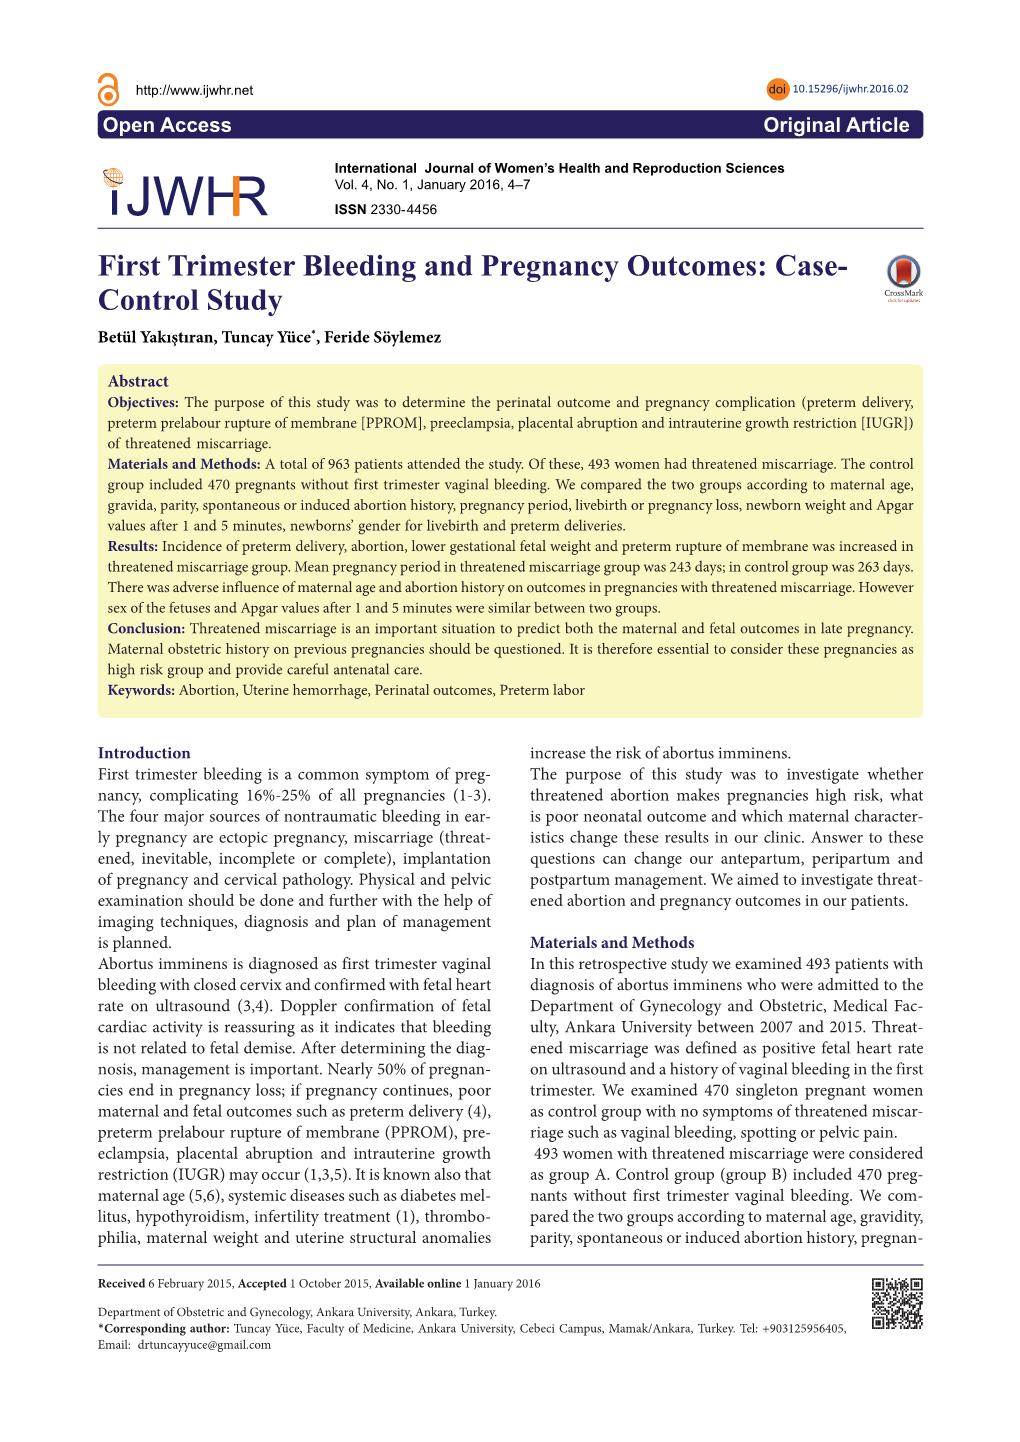 First Trimester Bleeding and Pregnancy Outcomes